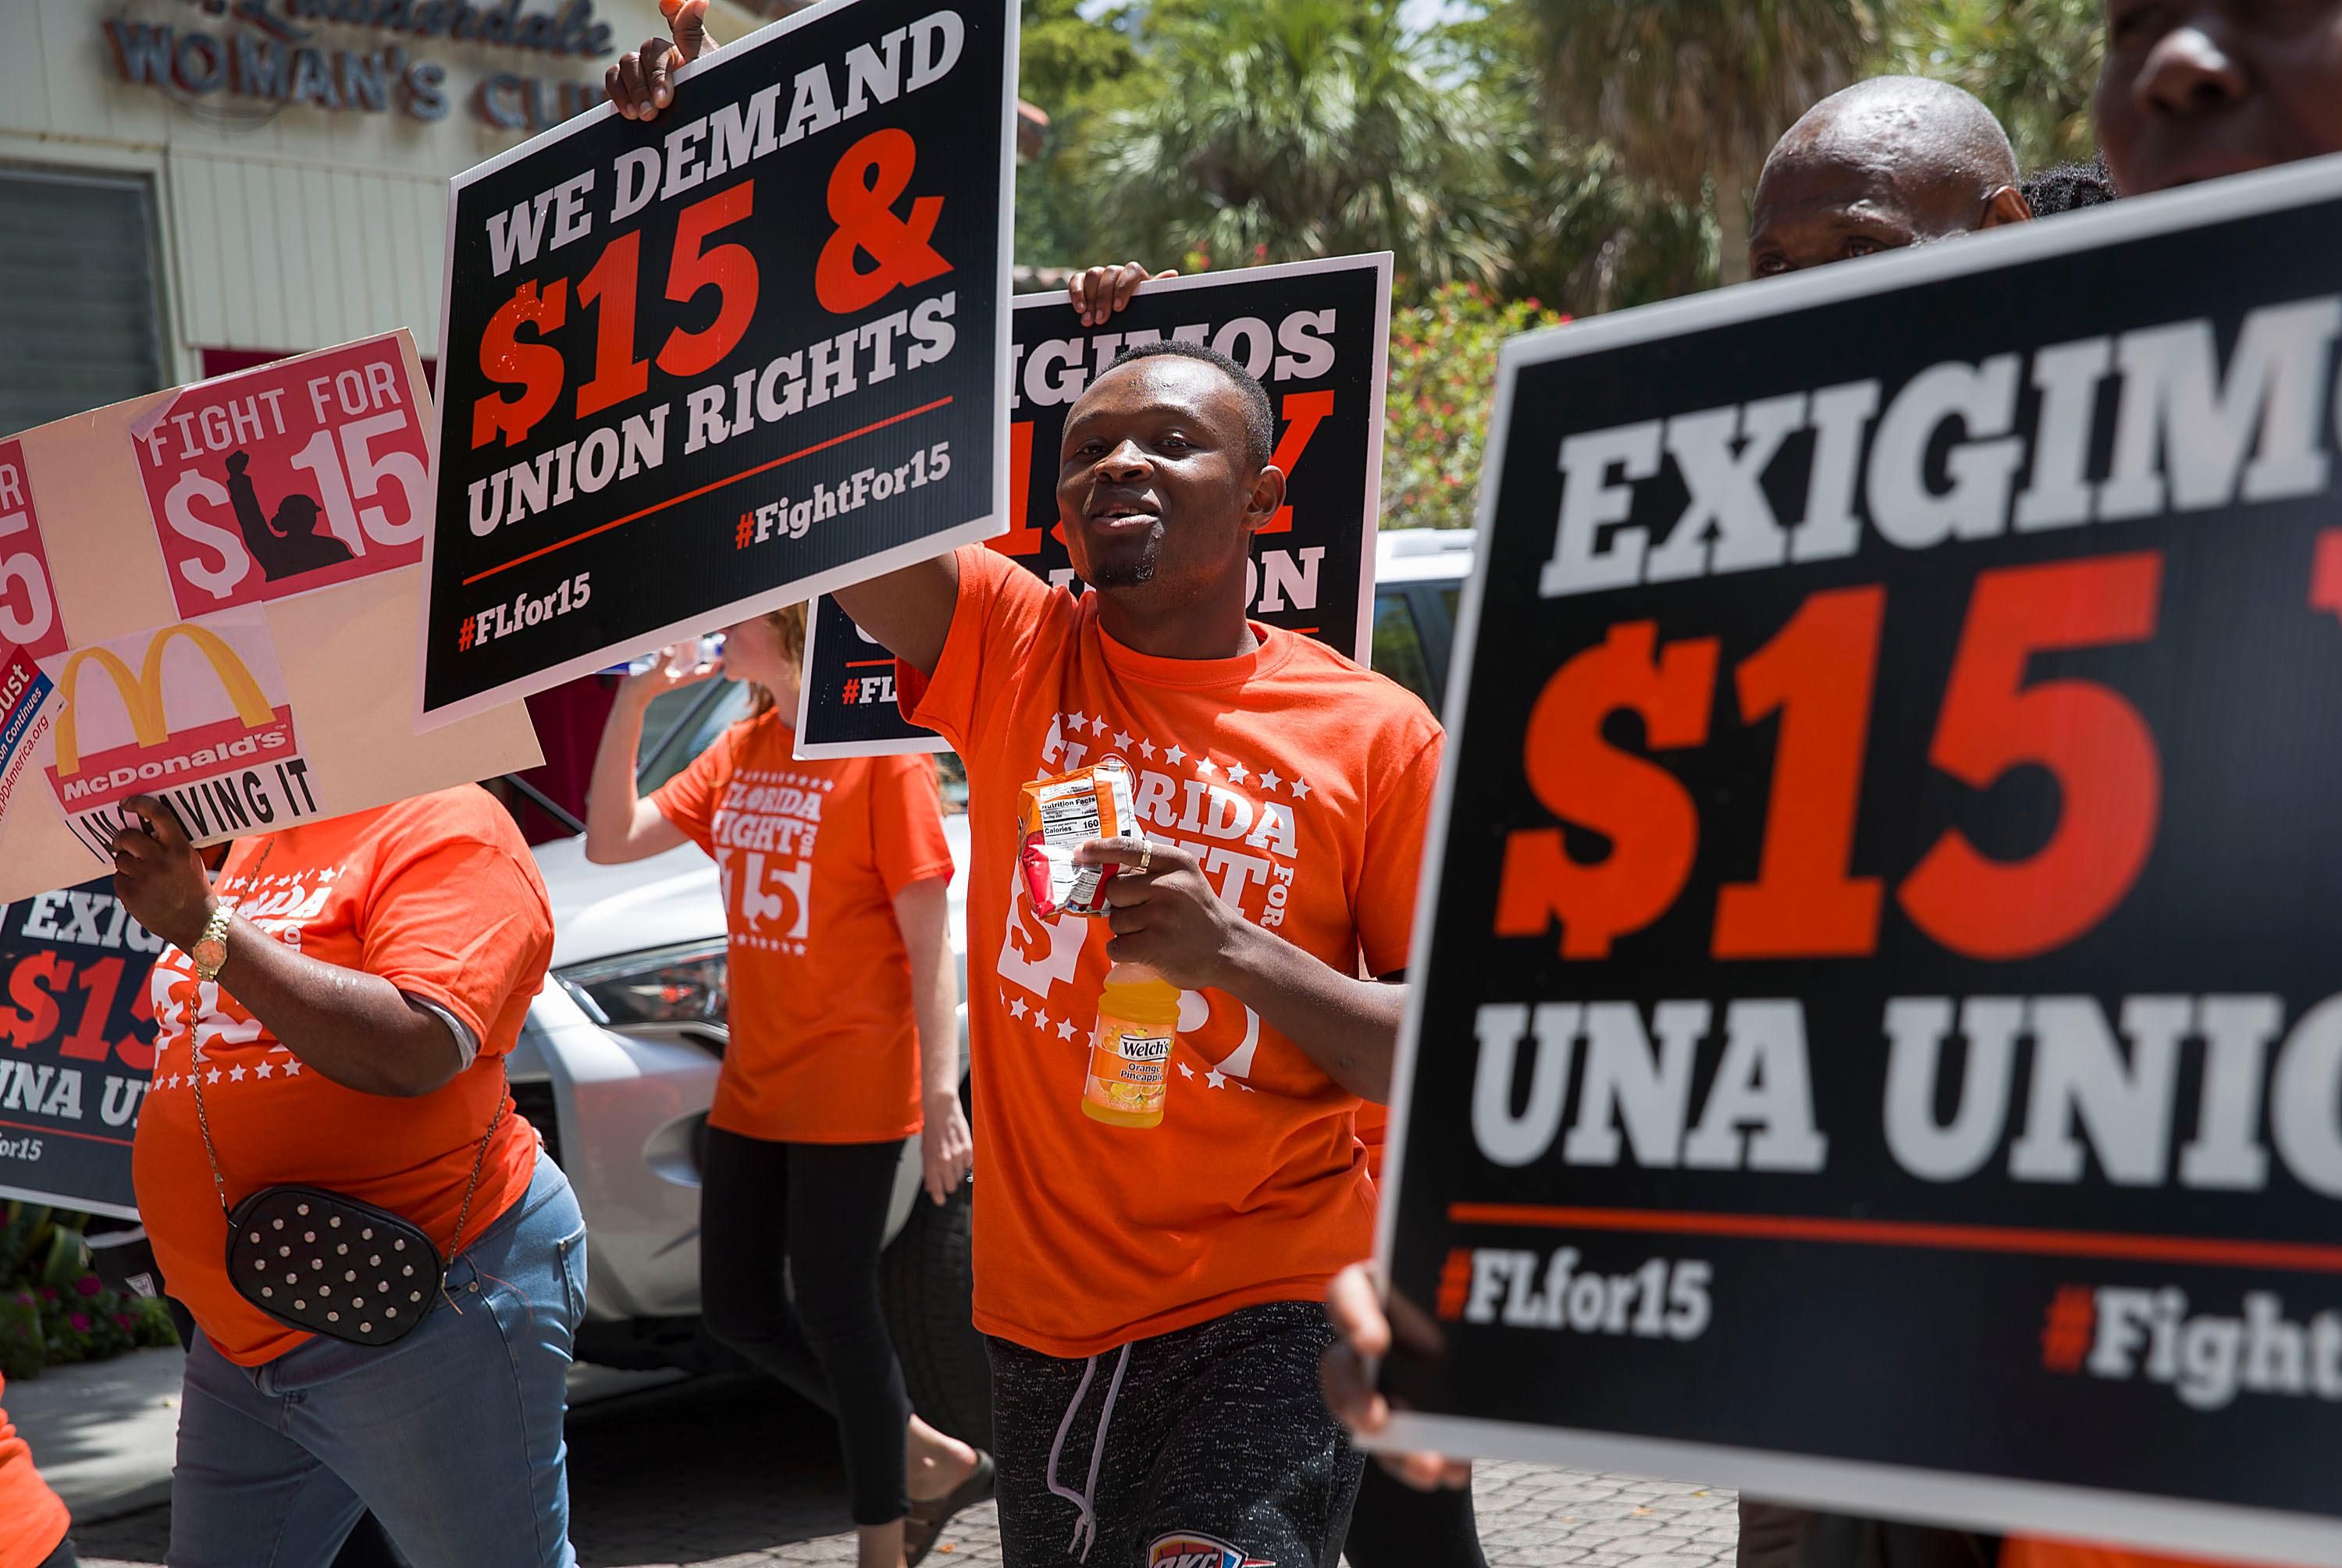 Workers rally for a $15 federal minimum wage